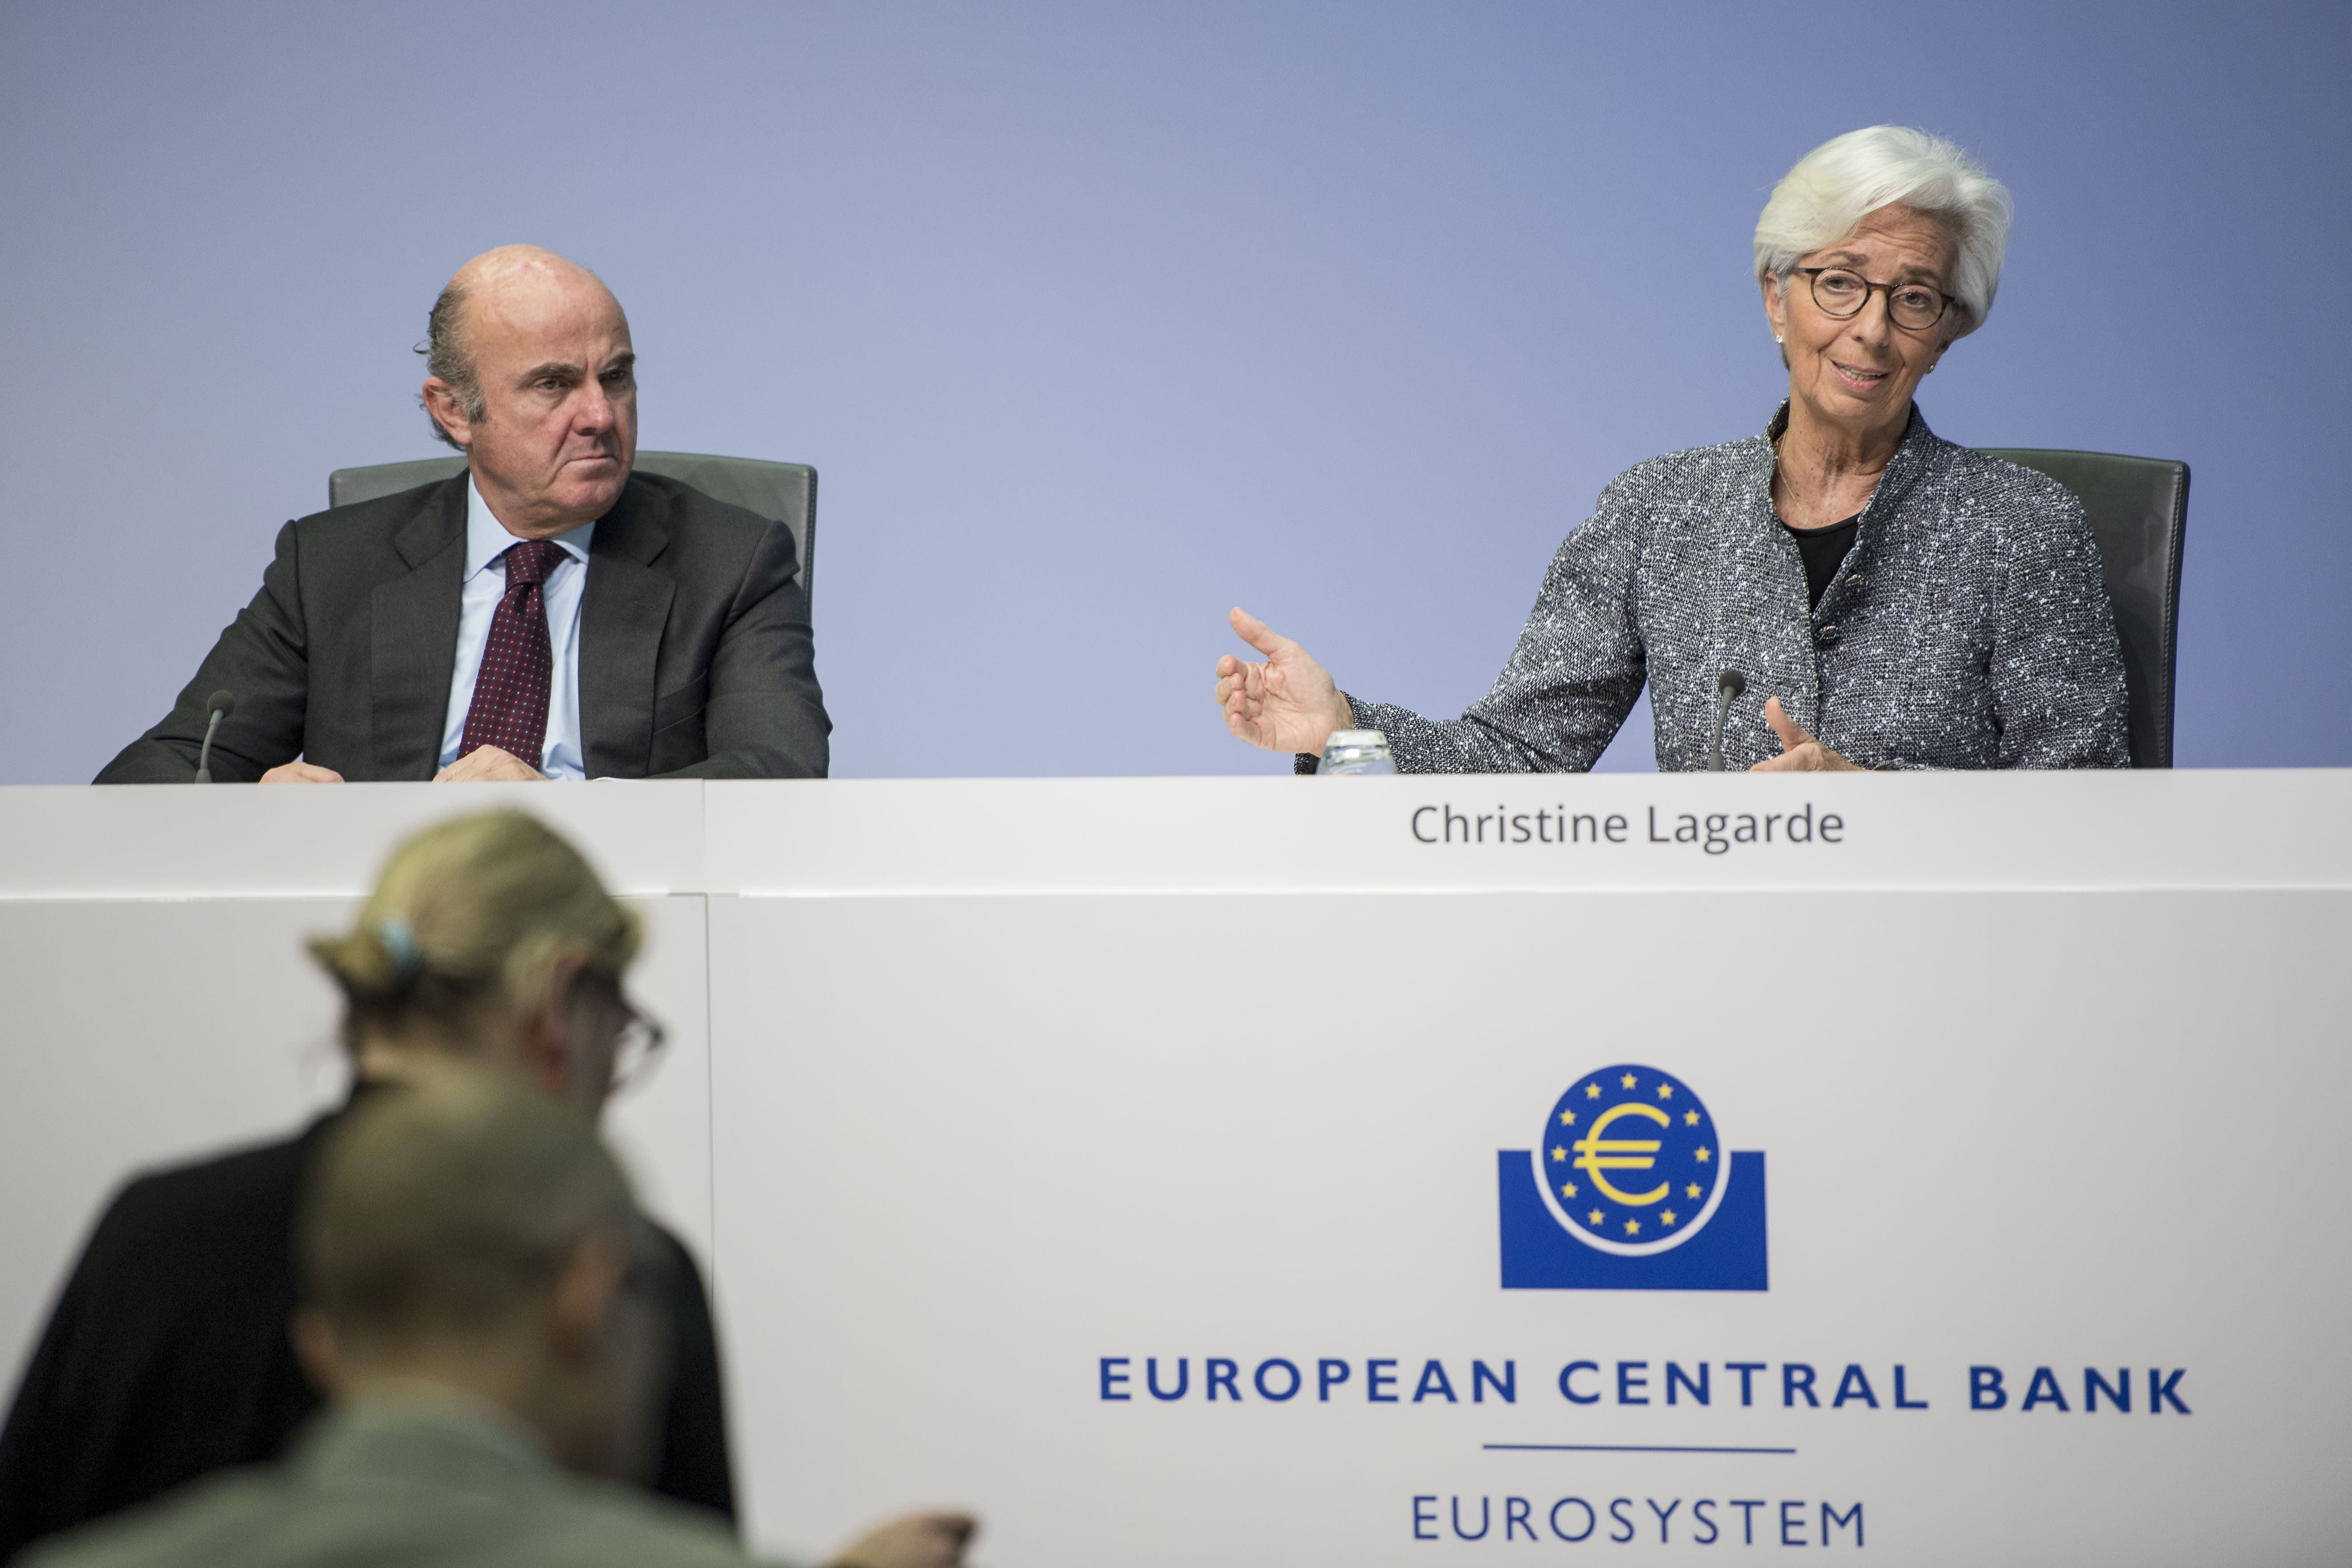 The European Central Bank is meeting while the Covid blockades complicate the recovery